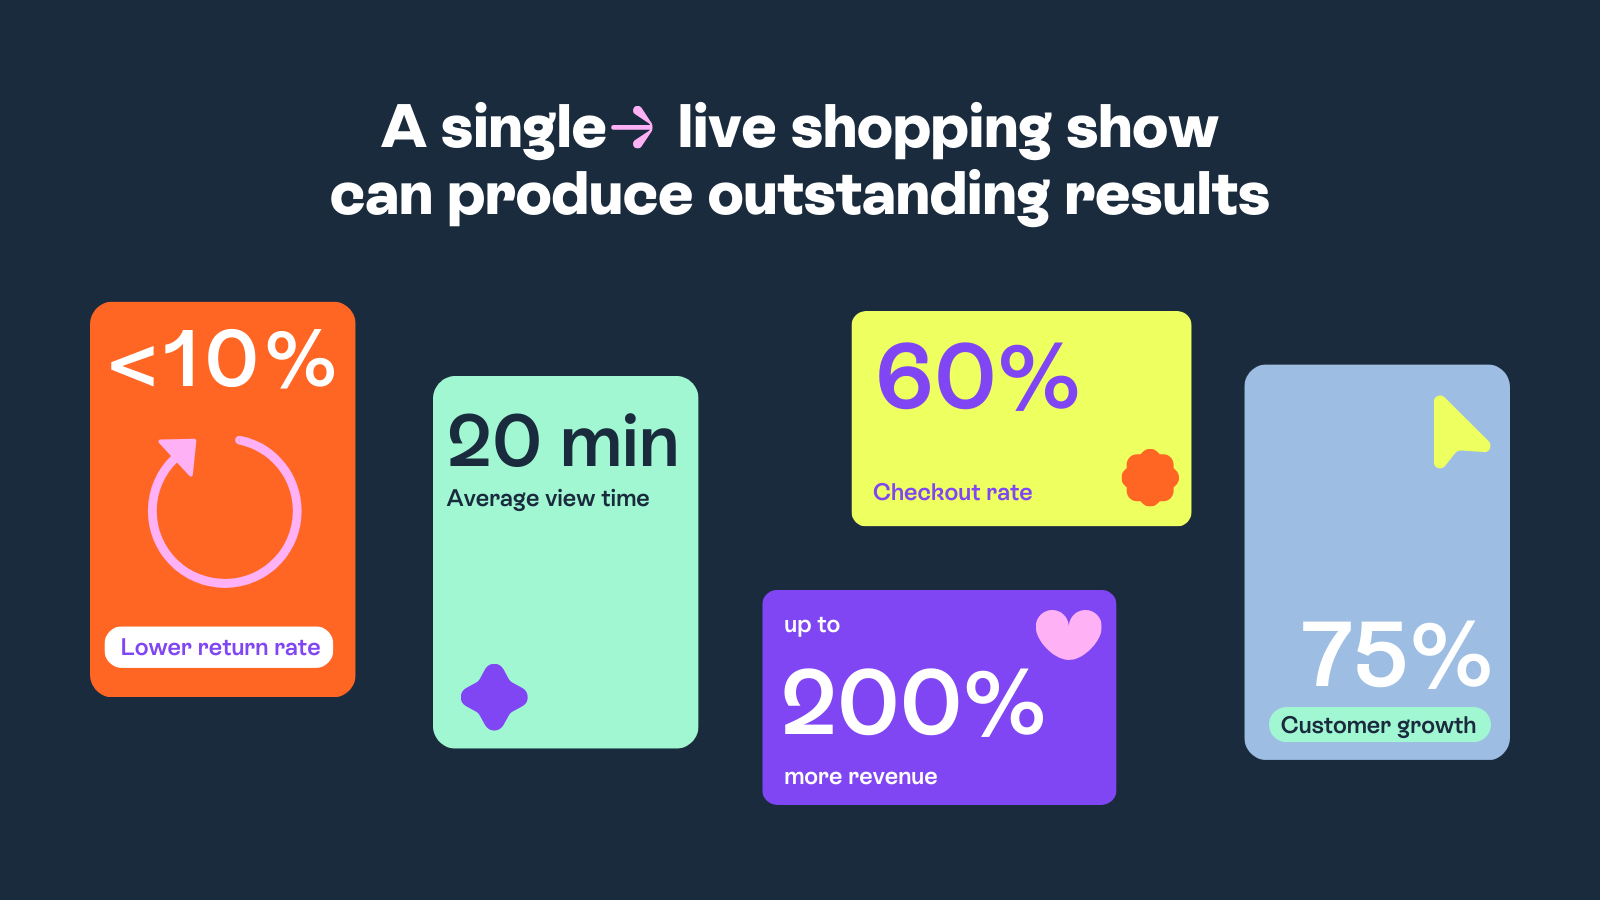 A single live shopping show can produce outstanding results